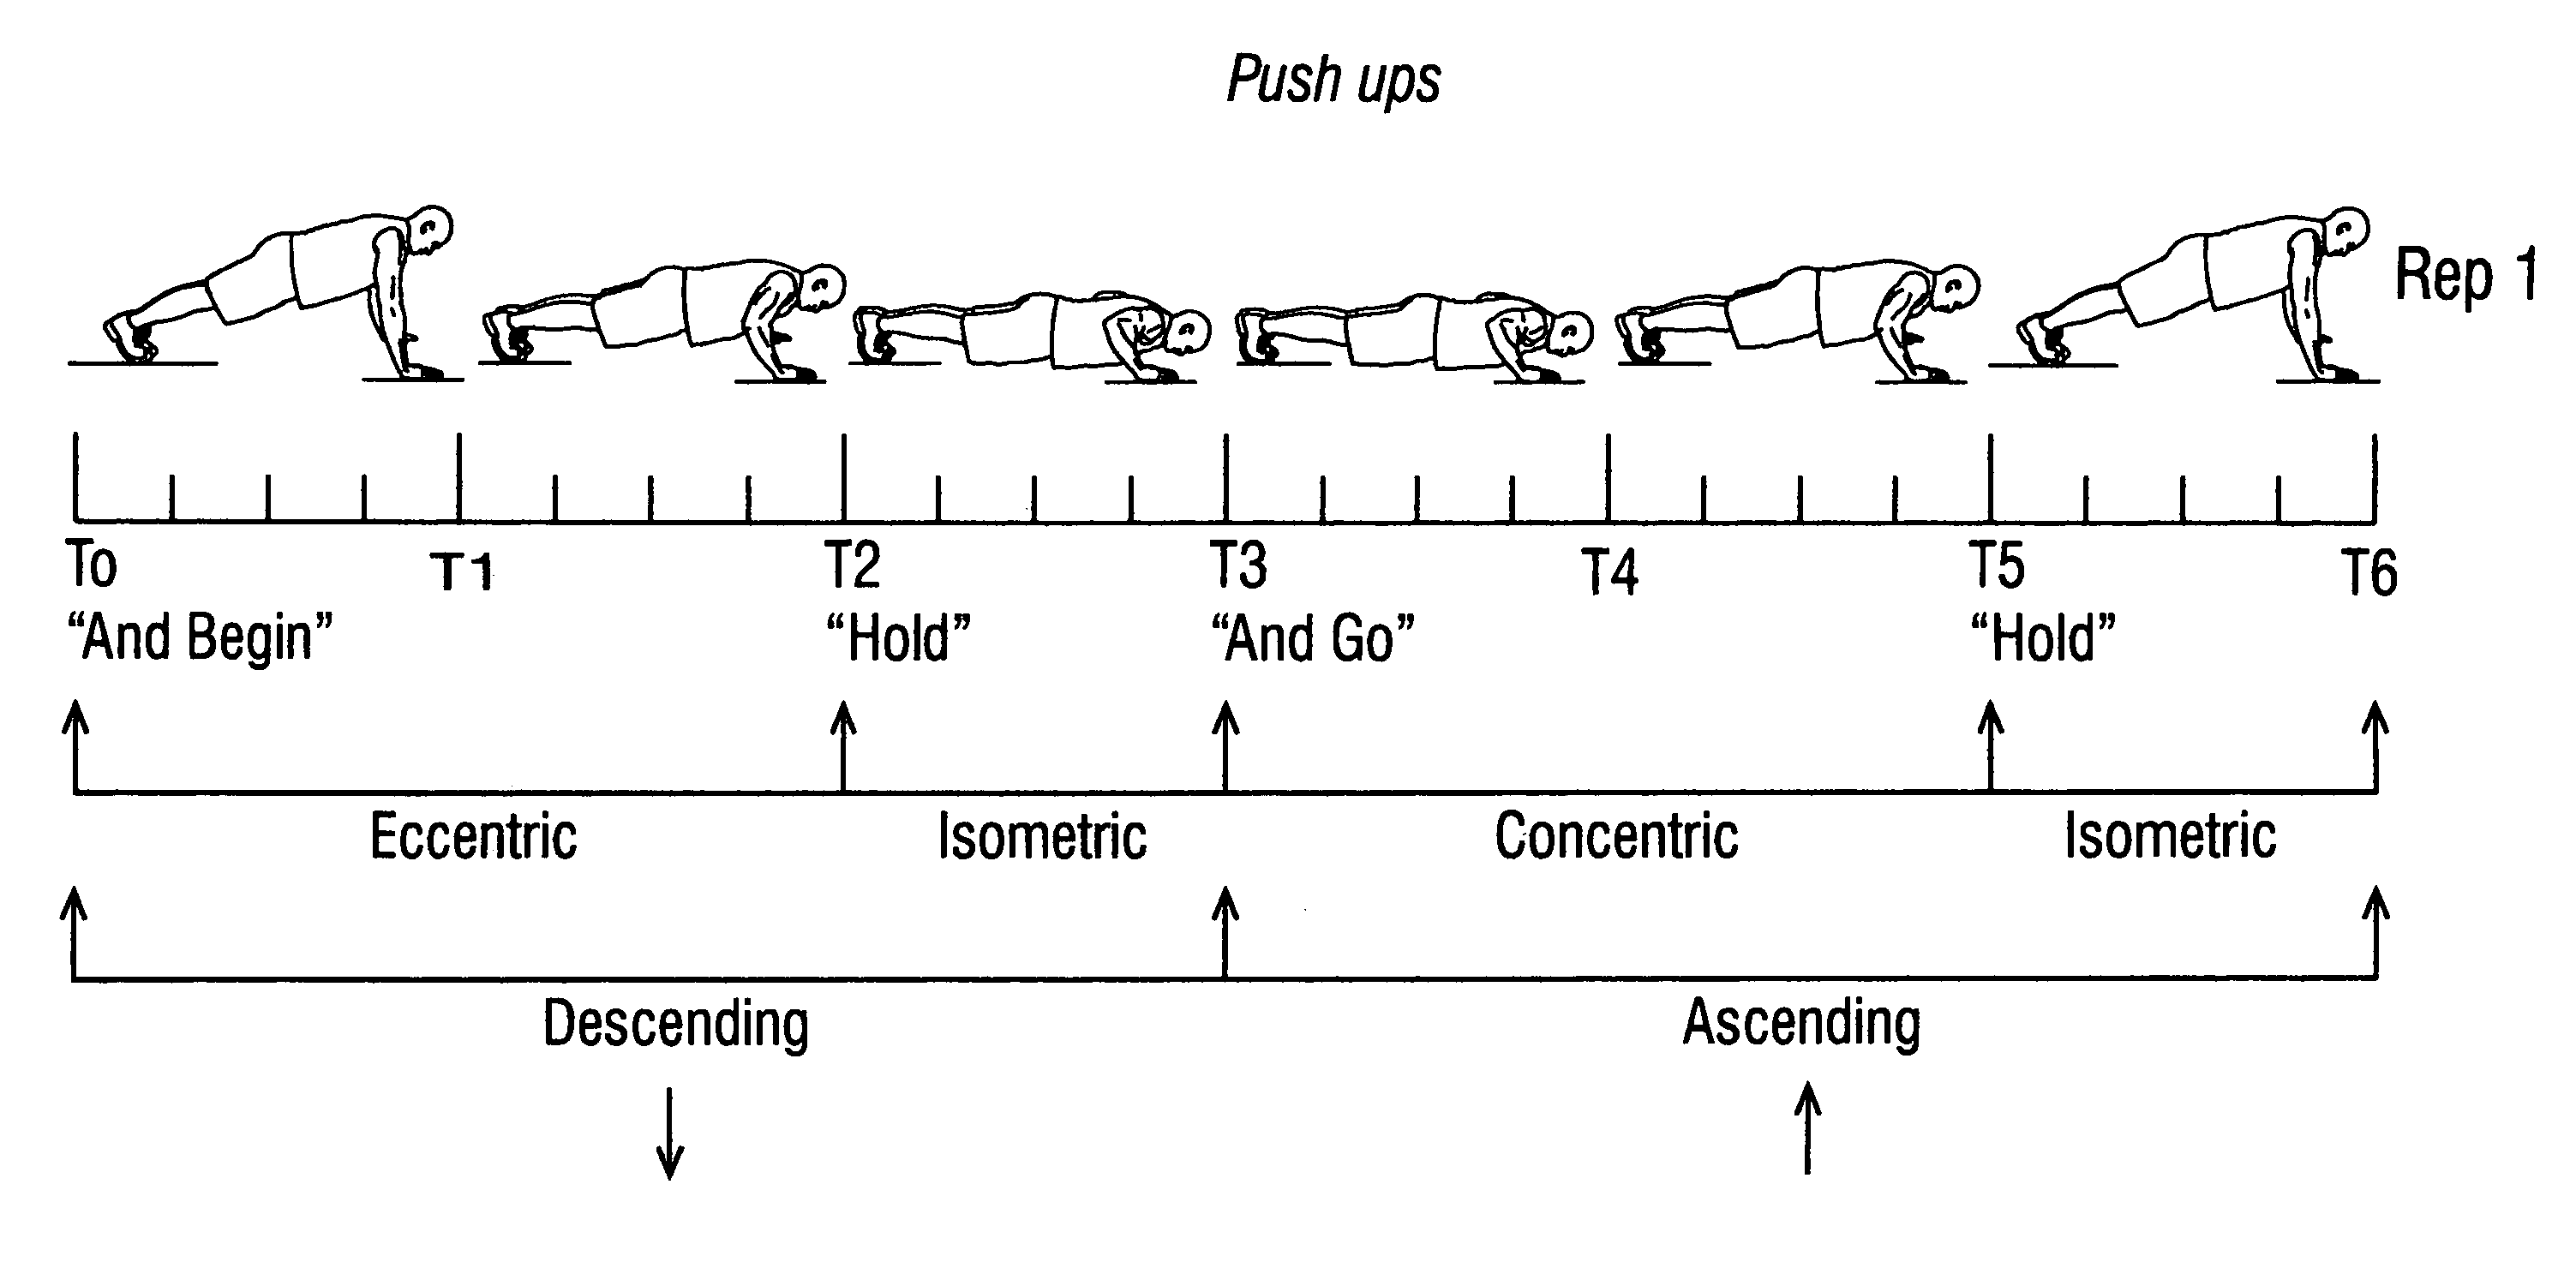 Method and apparatus for pacing human body exercises using audible cues